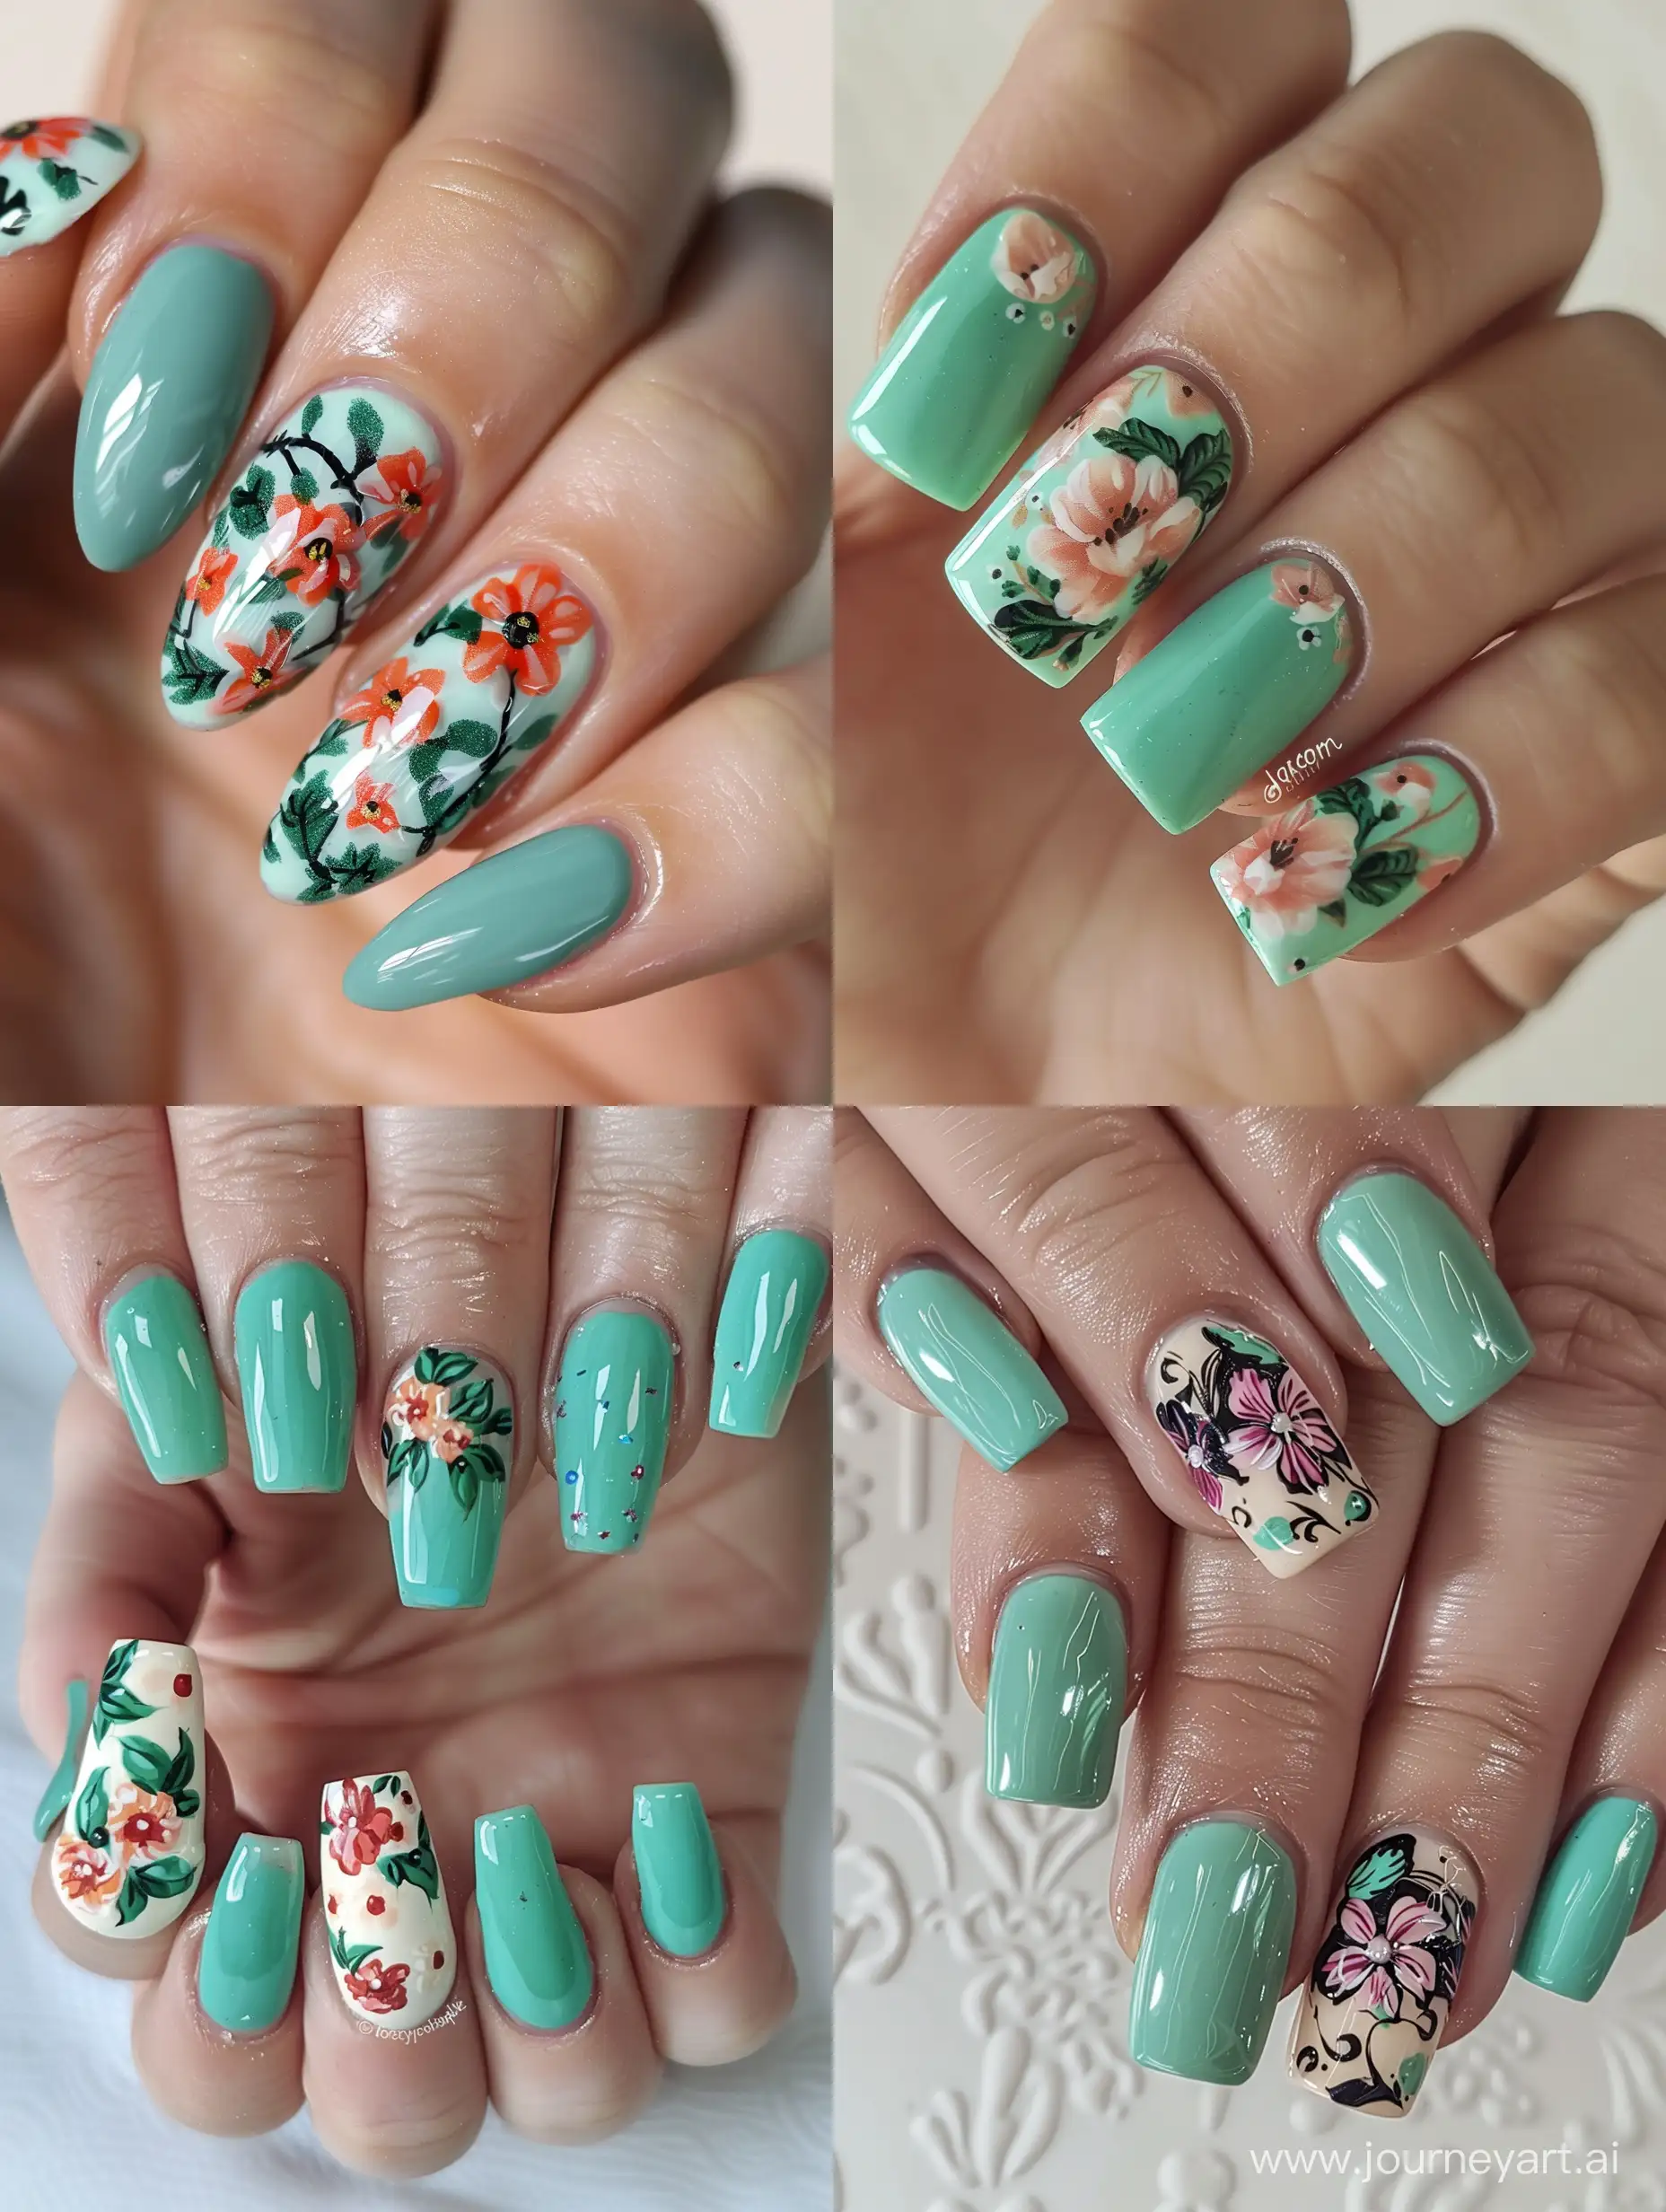 Vibrant-Floral-Nail-Art-with-Mint-Accents